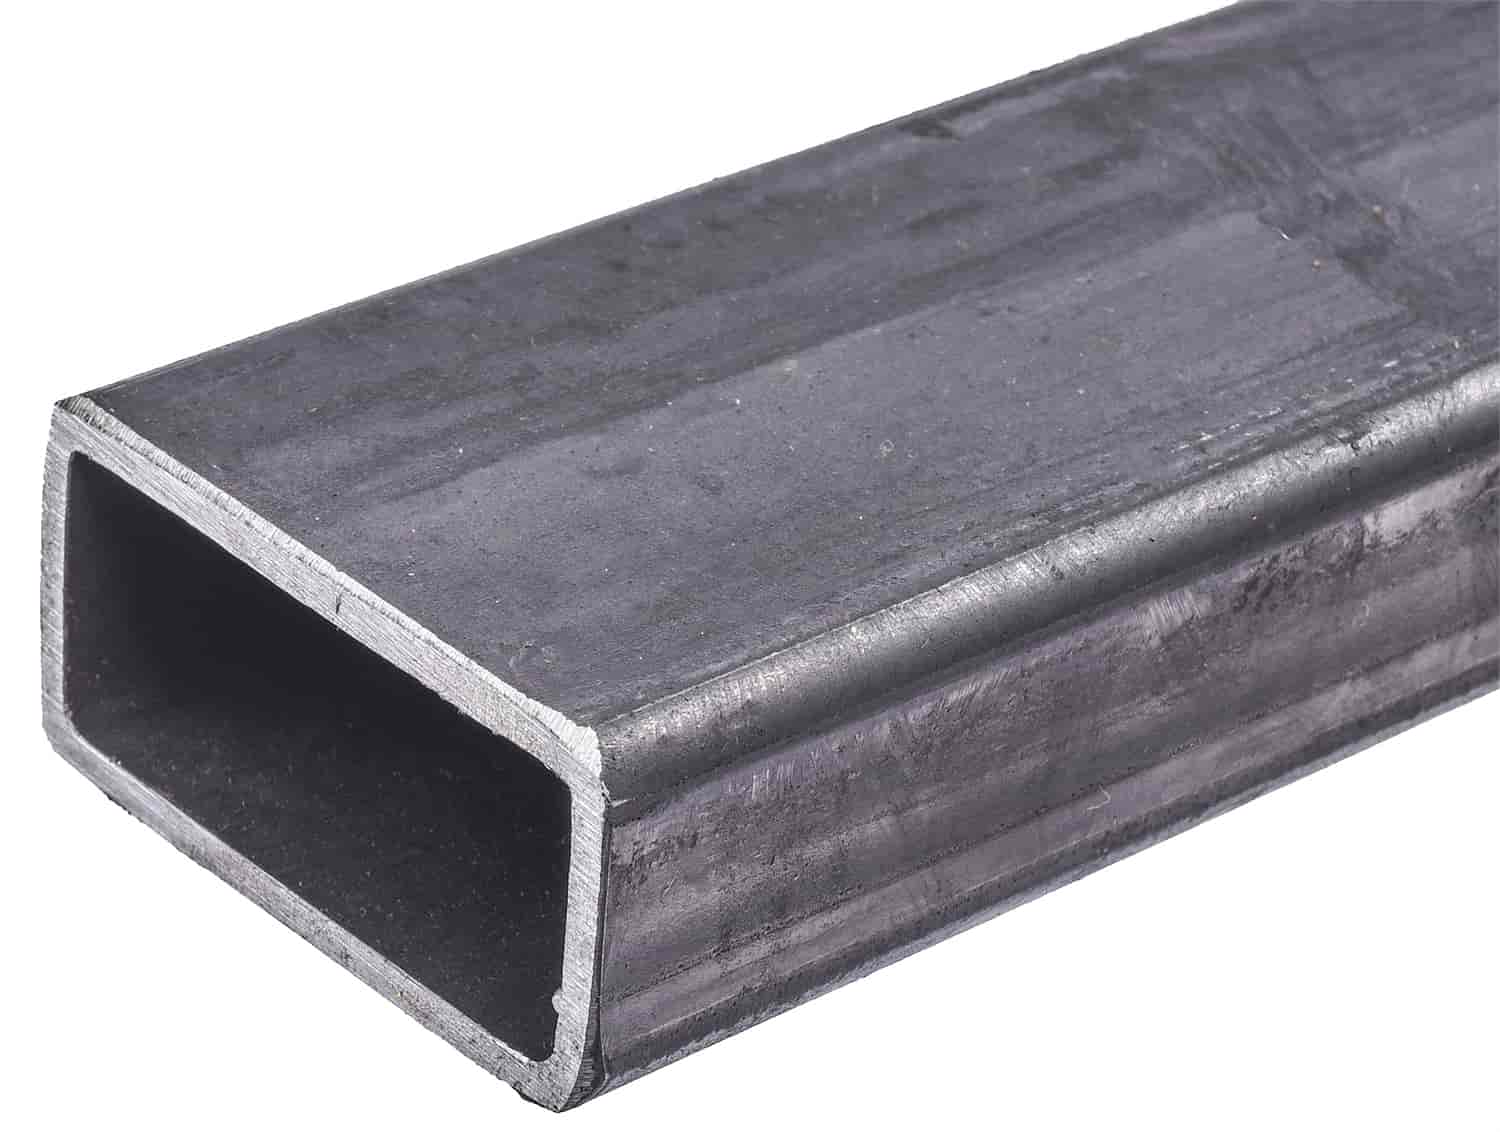 Mild Steel Tubing [Rectangular, 1 in. Height x 2 in. Width x 0.120 in. Thickness x 4 ft. Length]